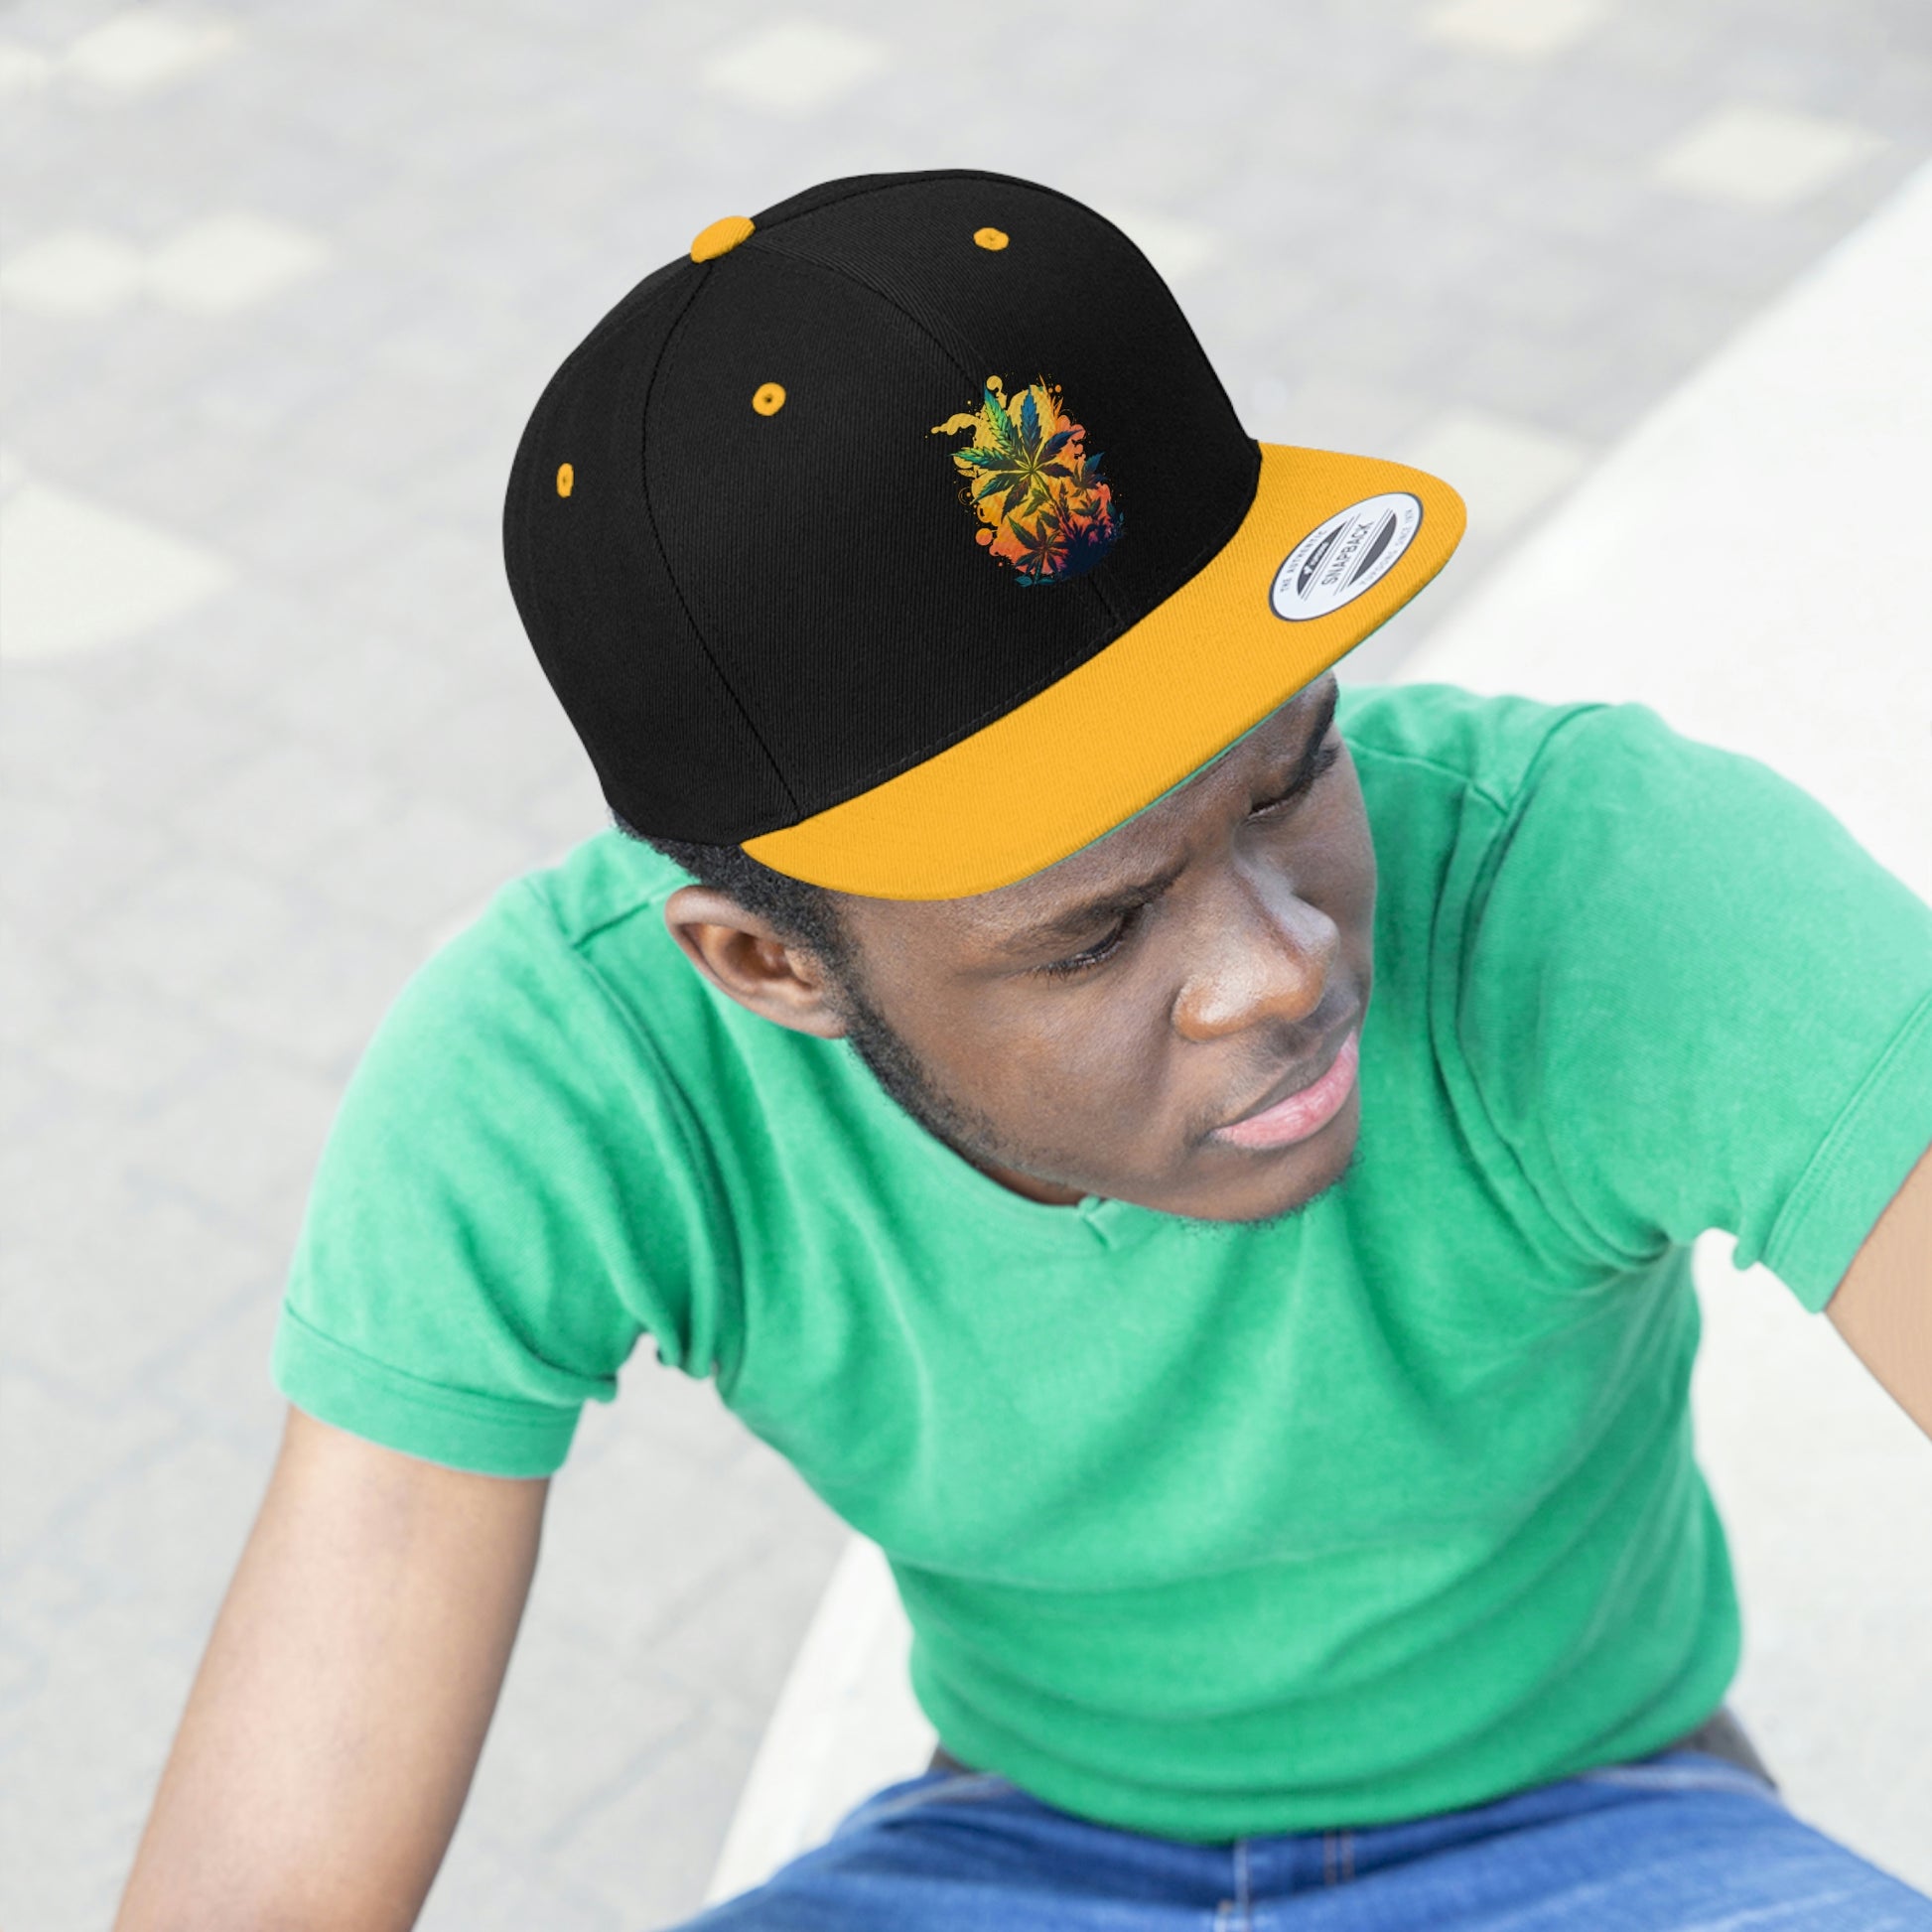 a young man gazing wearing a yellow and black snapback hat with the warm cannabis paradise logo which consists of weed leaves on a yellow and orange background